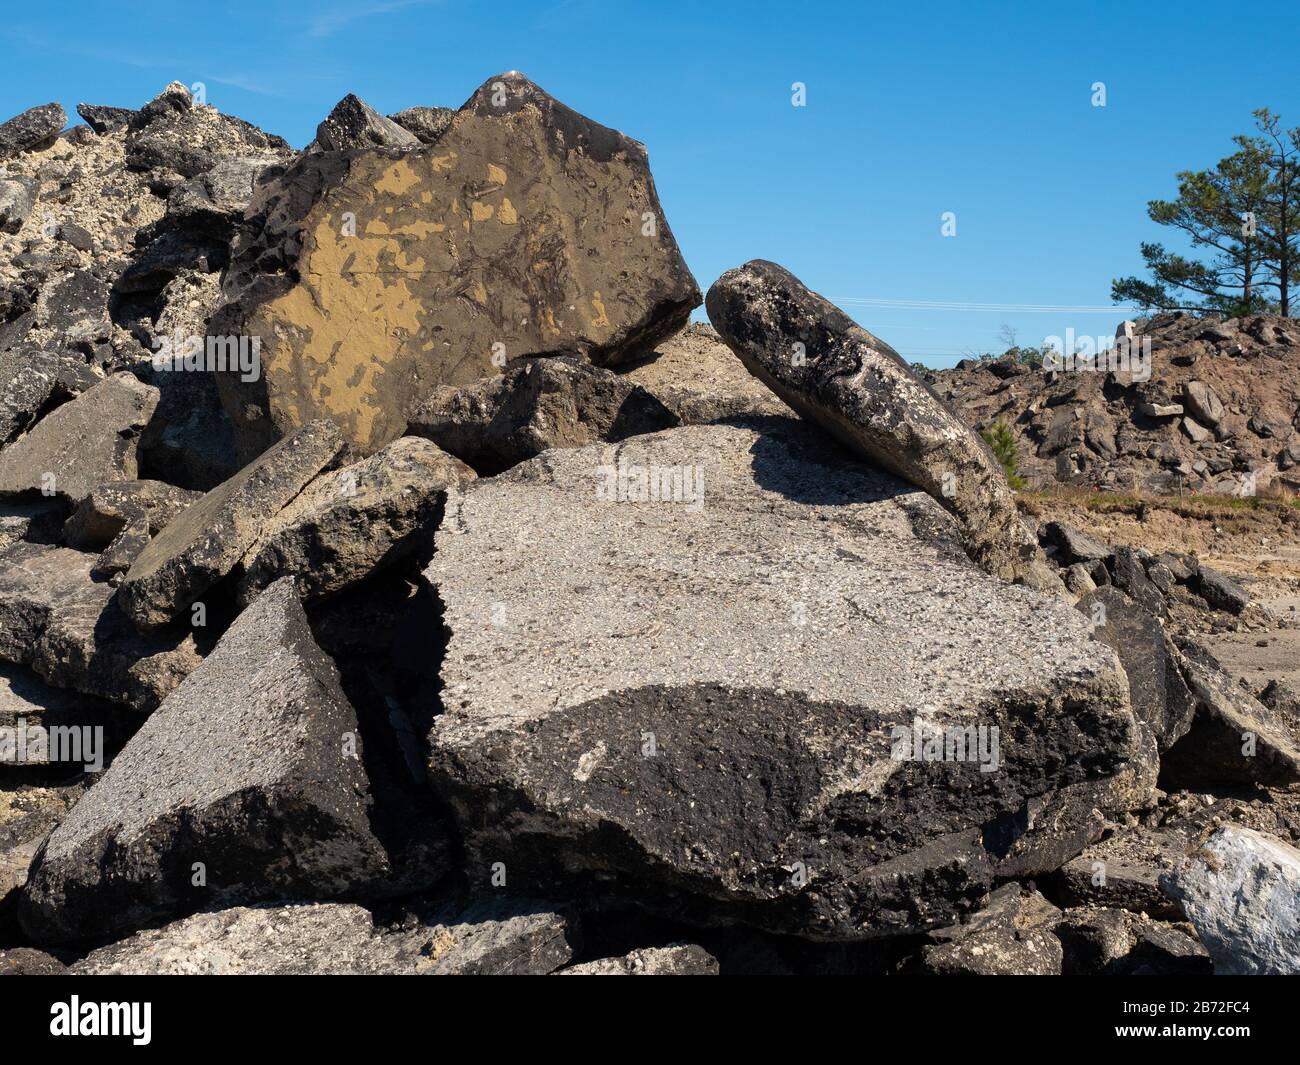 Two Mountains of Road Rubble, Concrete and Asphalt Pavement Debris, boulder-like sections of road pavement and roadbed debris in foreground Stock Photo